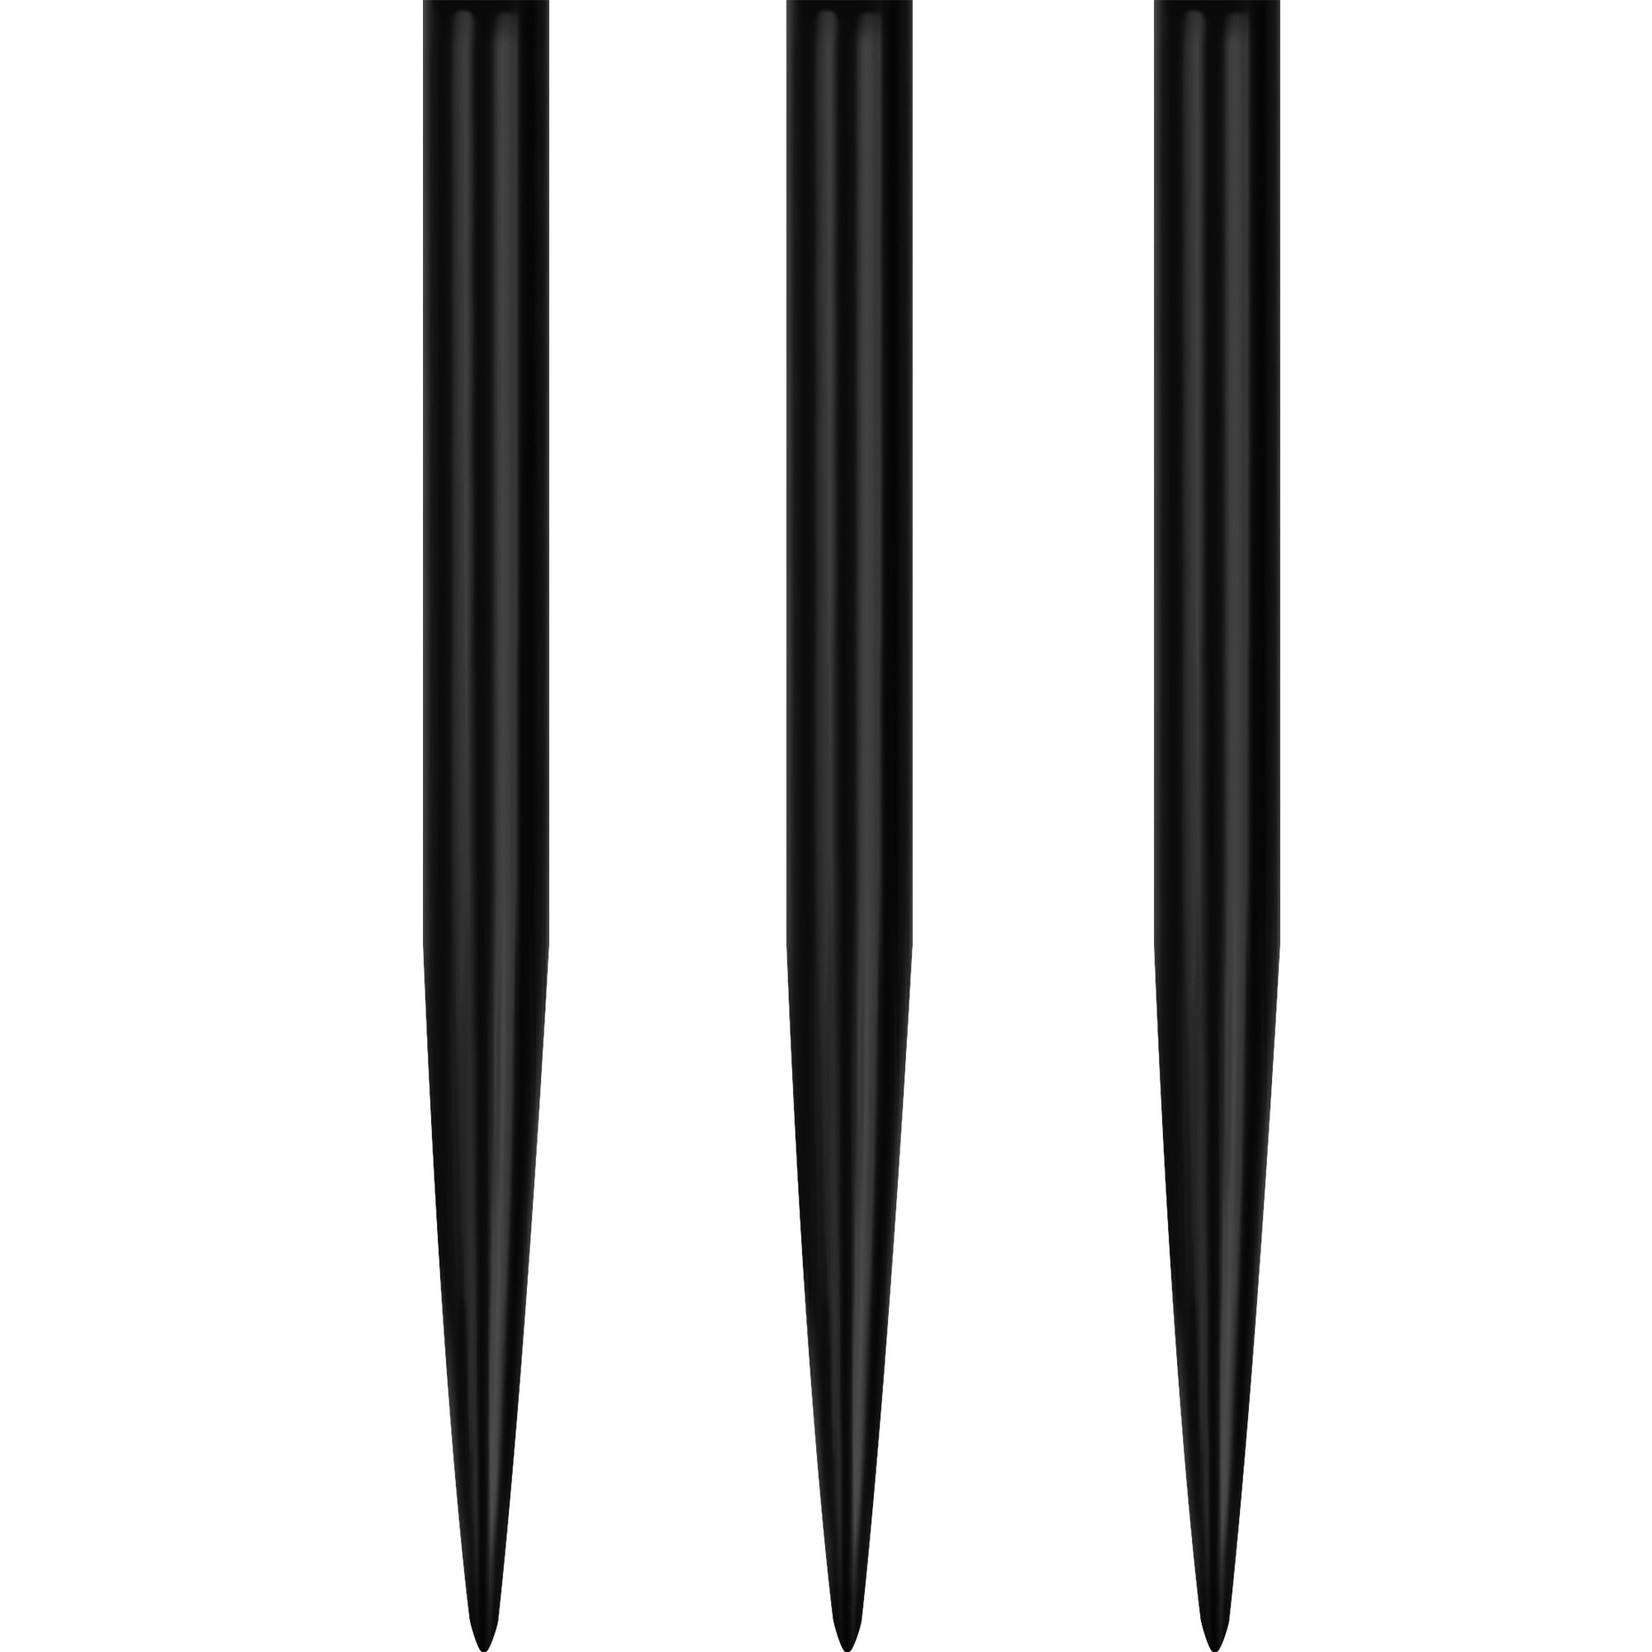 Mission Darts Mission Glide Dart Points - Replacement Smooth Points - Black - Length 30mm